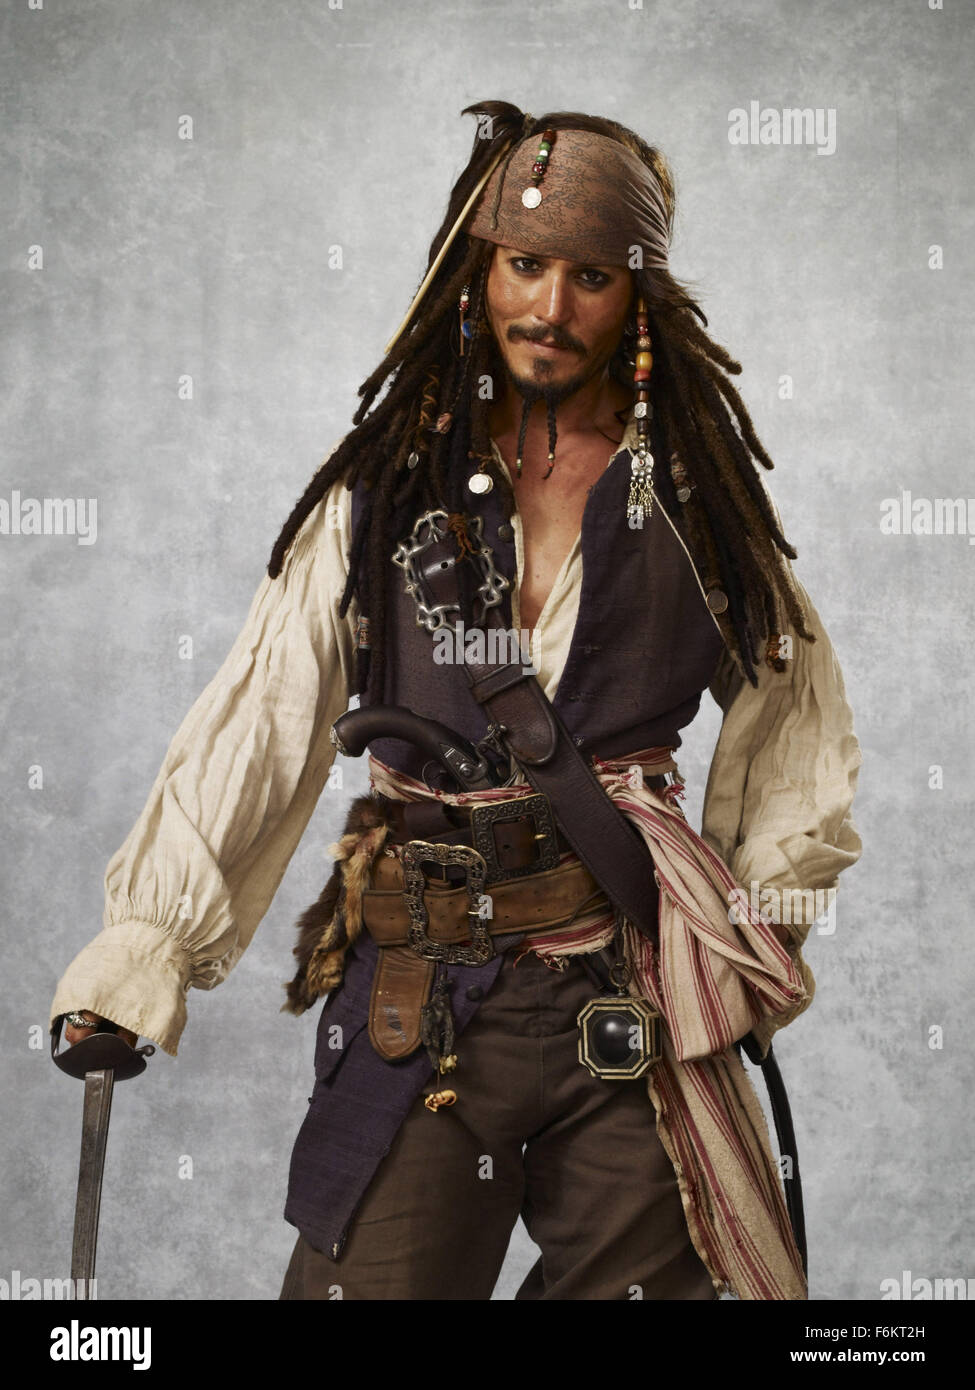 RELEASE DATE: May 25, 2007. STUDIO: Jerry Bruckheimer Films/Walt Disney Pictures. PLOT: Captain Barbossa, Will Turner and Elizabeth Swann must sail off the edge of the map, navigate treachery and betrayal, and make their final alliances for one last decisive battle. PICTURED: Composite art for the promotional movie posters featuring JOHNNY DEPP as Captain Jack Sparrow. Stock Photo